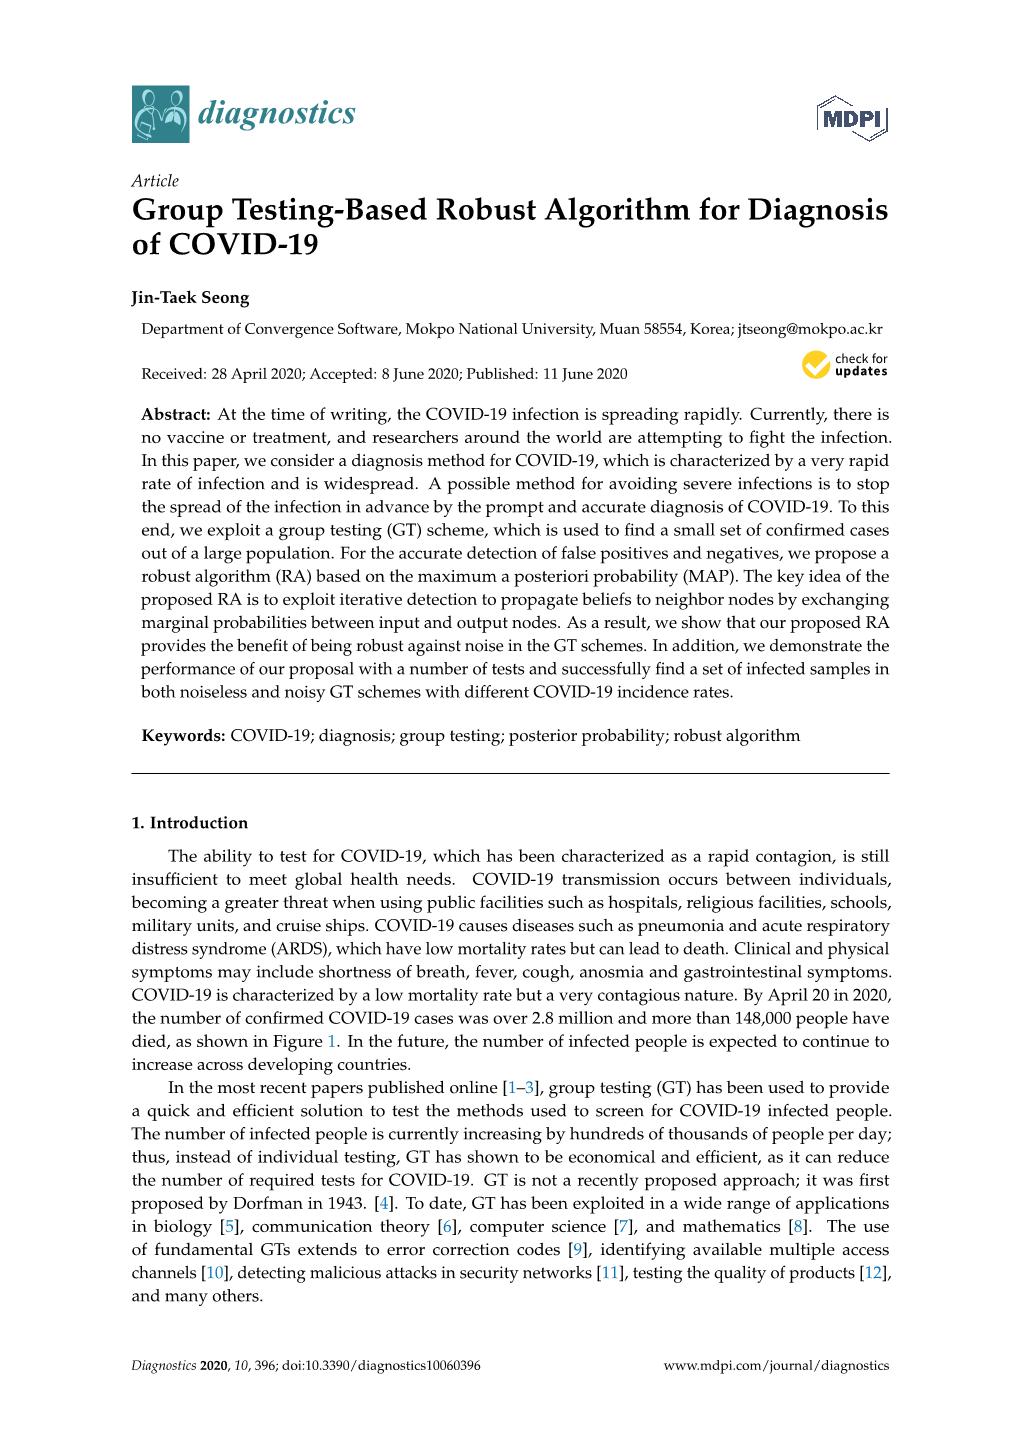 Group Testing-Based Robust Algorithm for Diagnosis of COVID-19